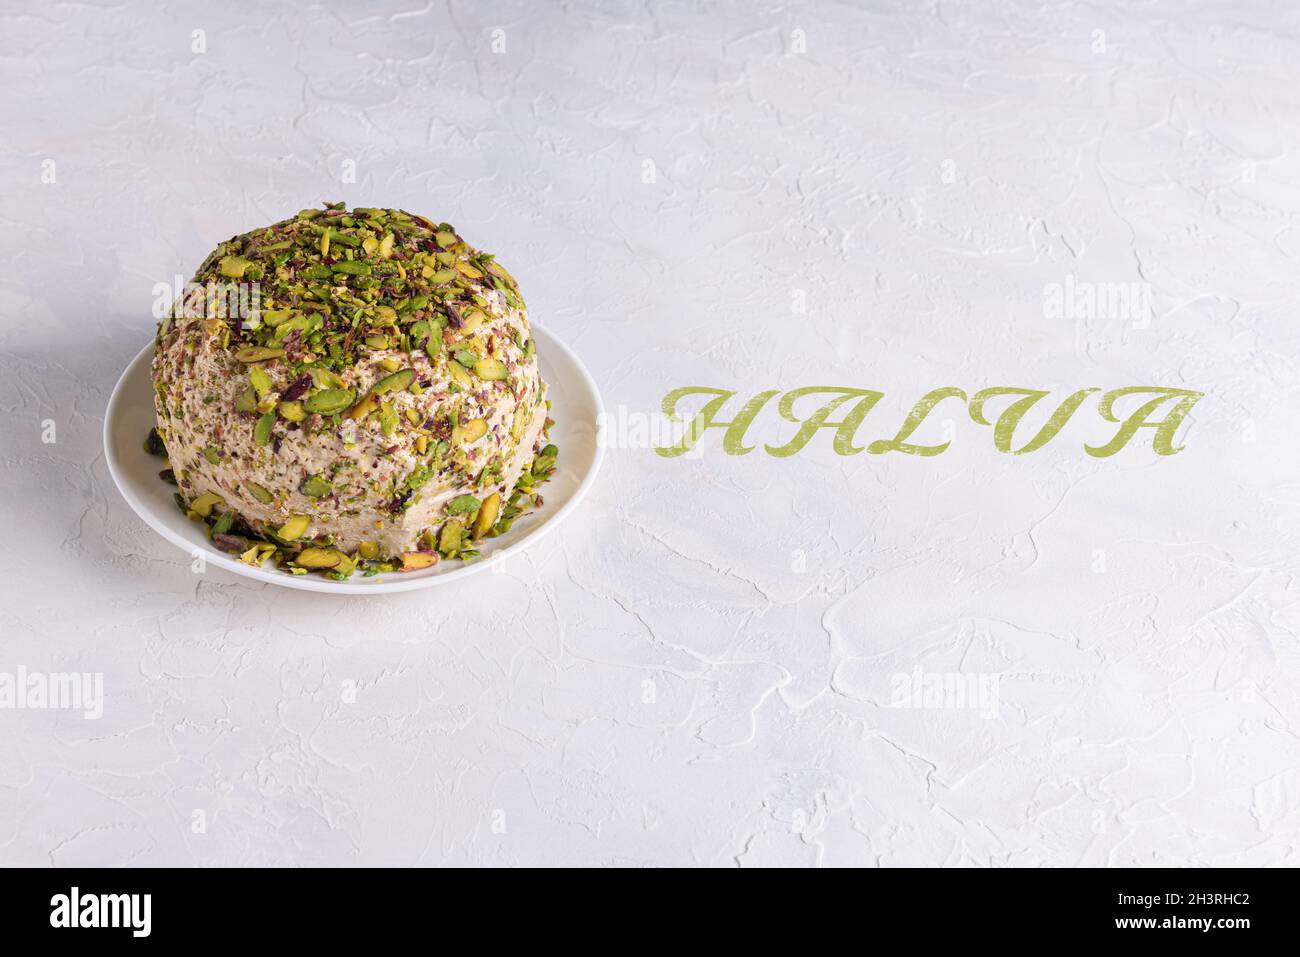 Sesame halva with chopped pistachios on white plate on textured background with Halva green text. Traditional middle eastern sweets. Jewish, turkish, Stock Photo